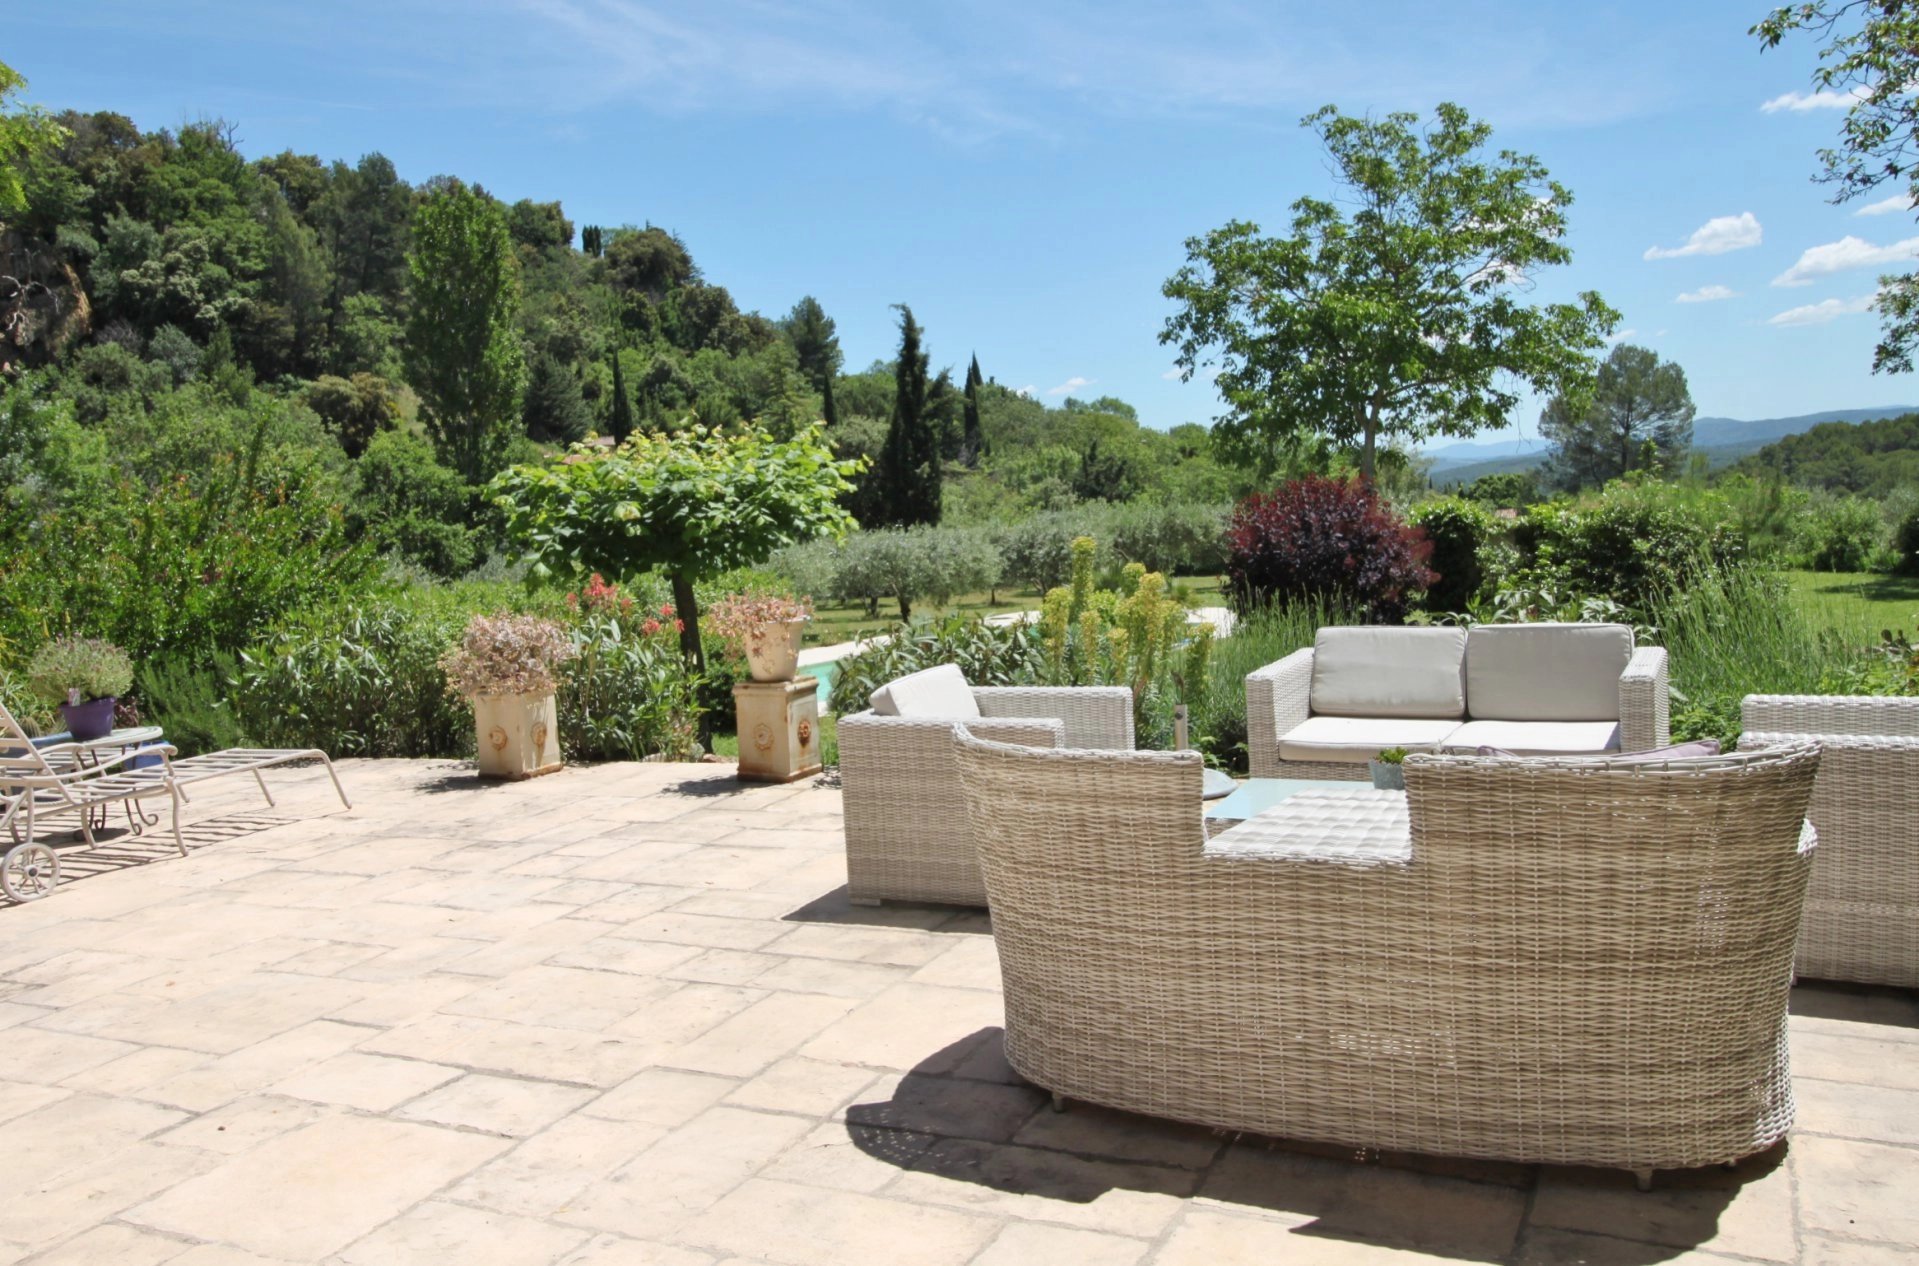 Beautiful bastide, quiet area, walking distance to the village